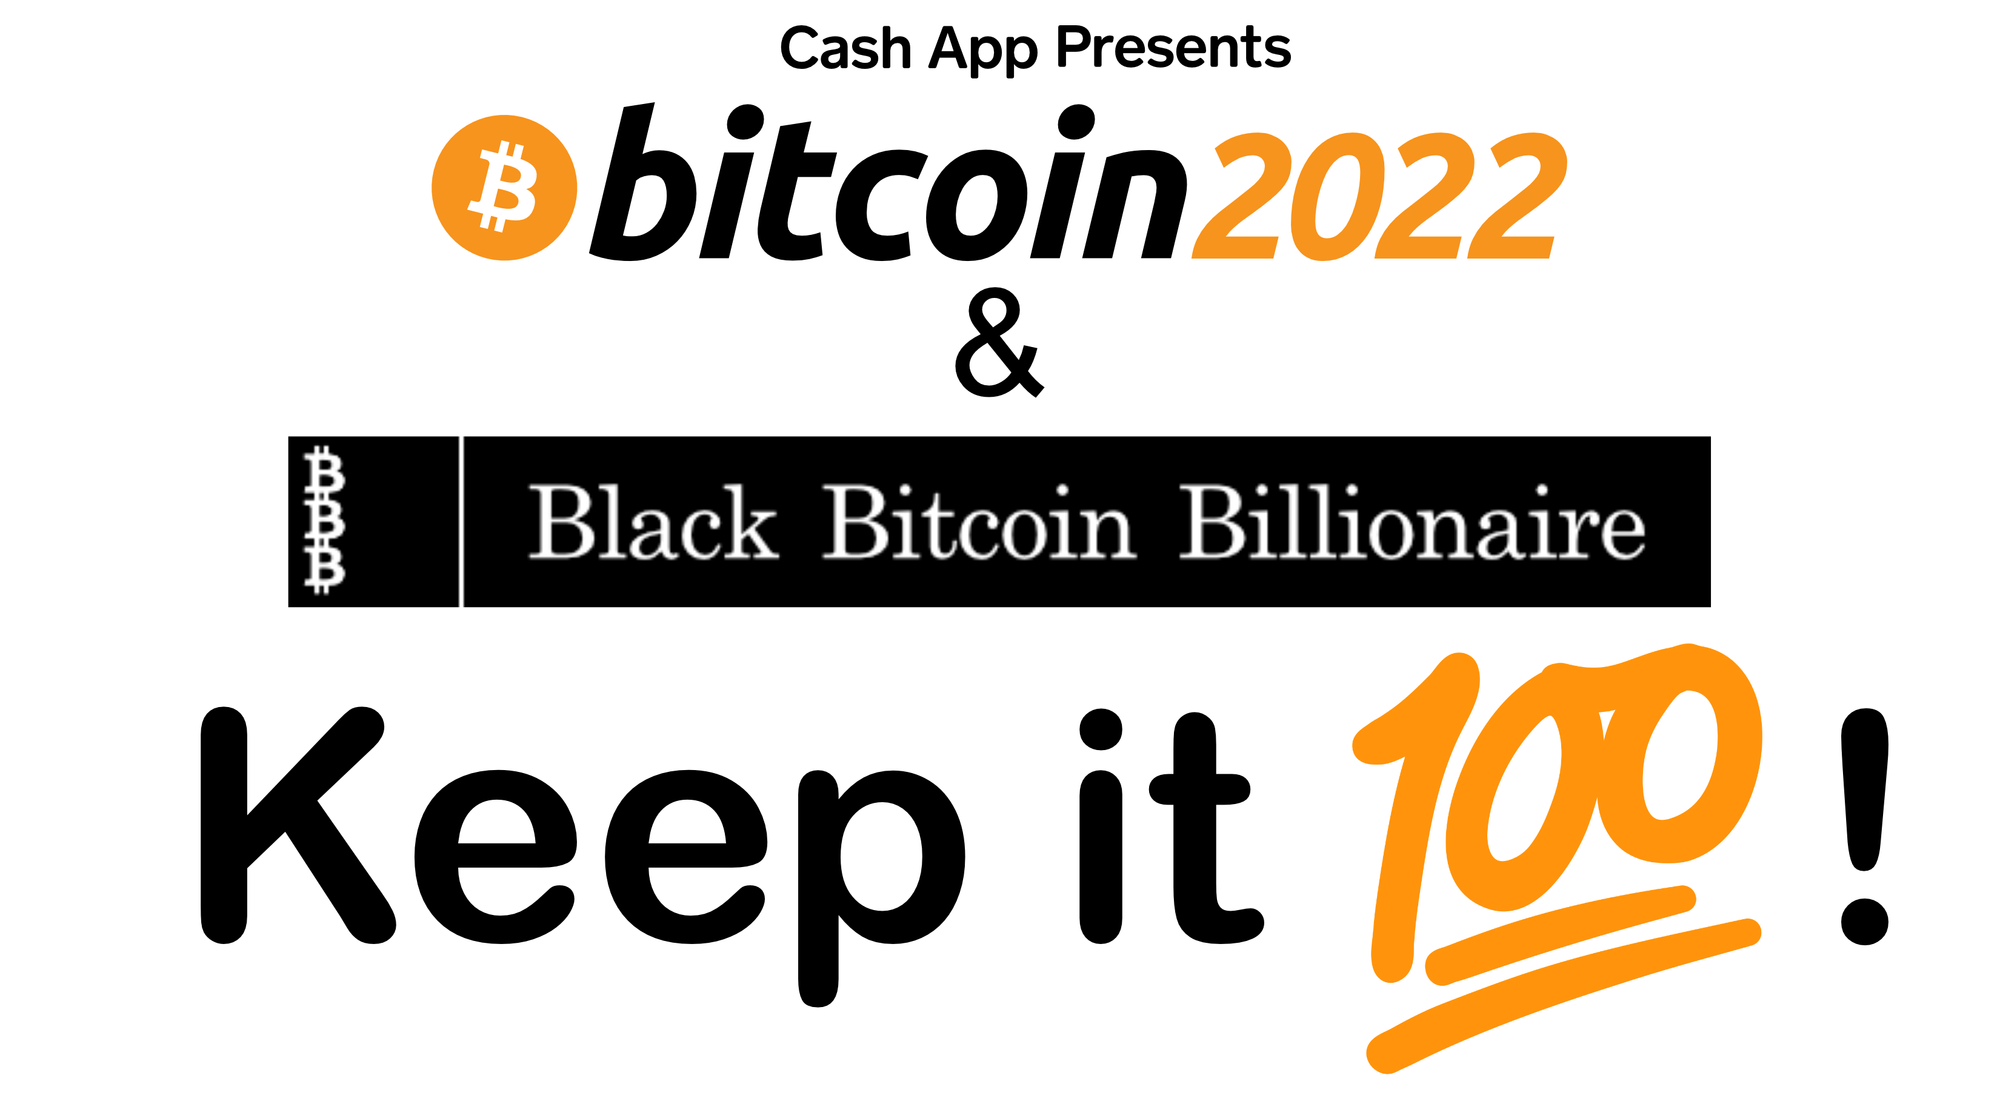 $100,000 in Free Bitcoin 2022 Tickets for Black Bitcoin Billionaire Members sponsored by BTC inc. Sign Up Below!